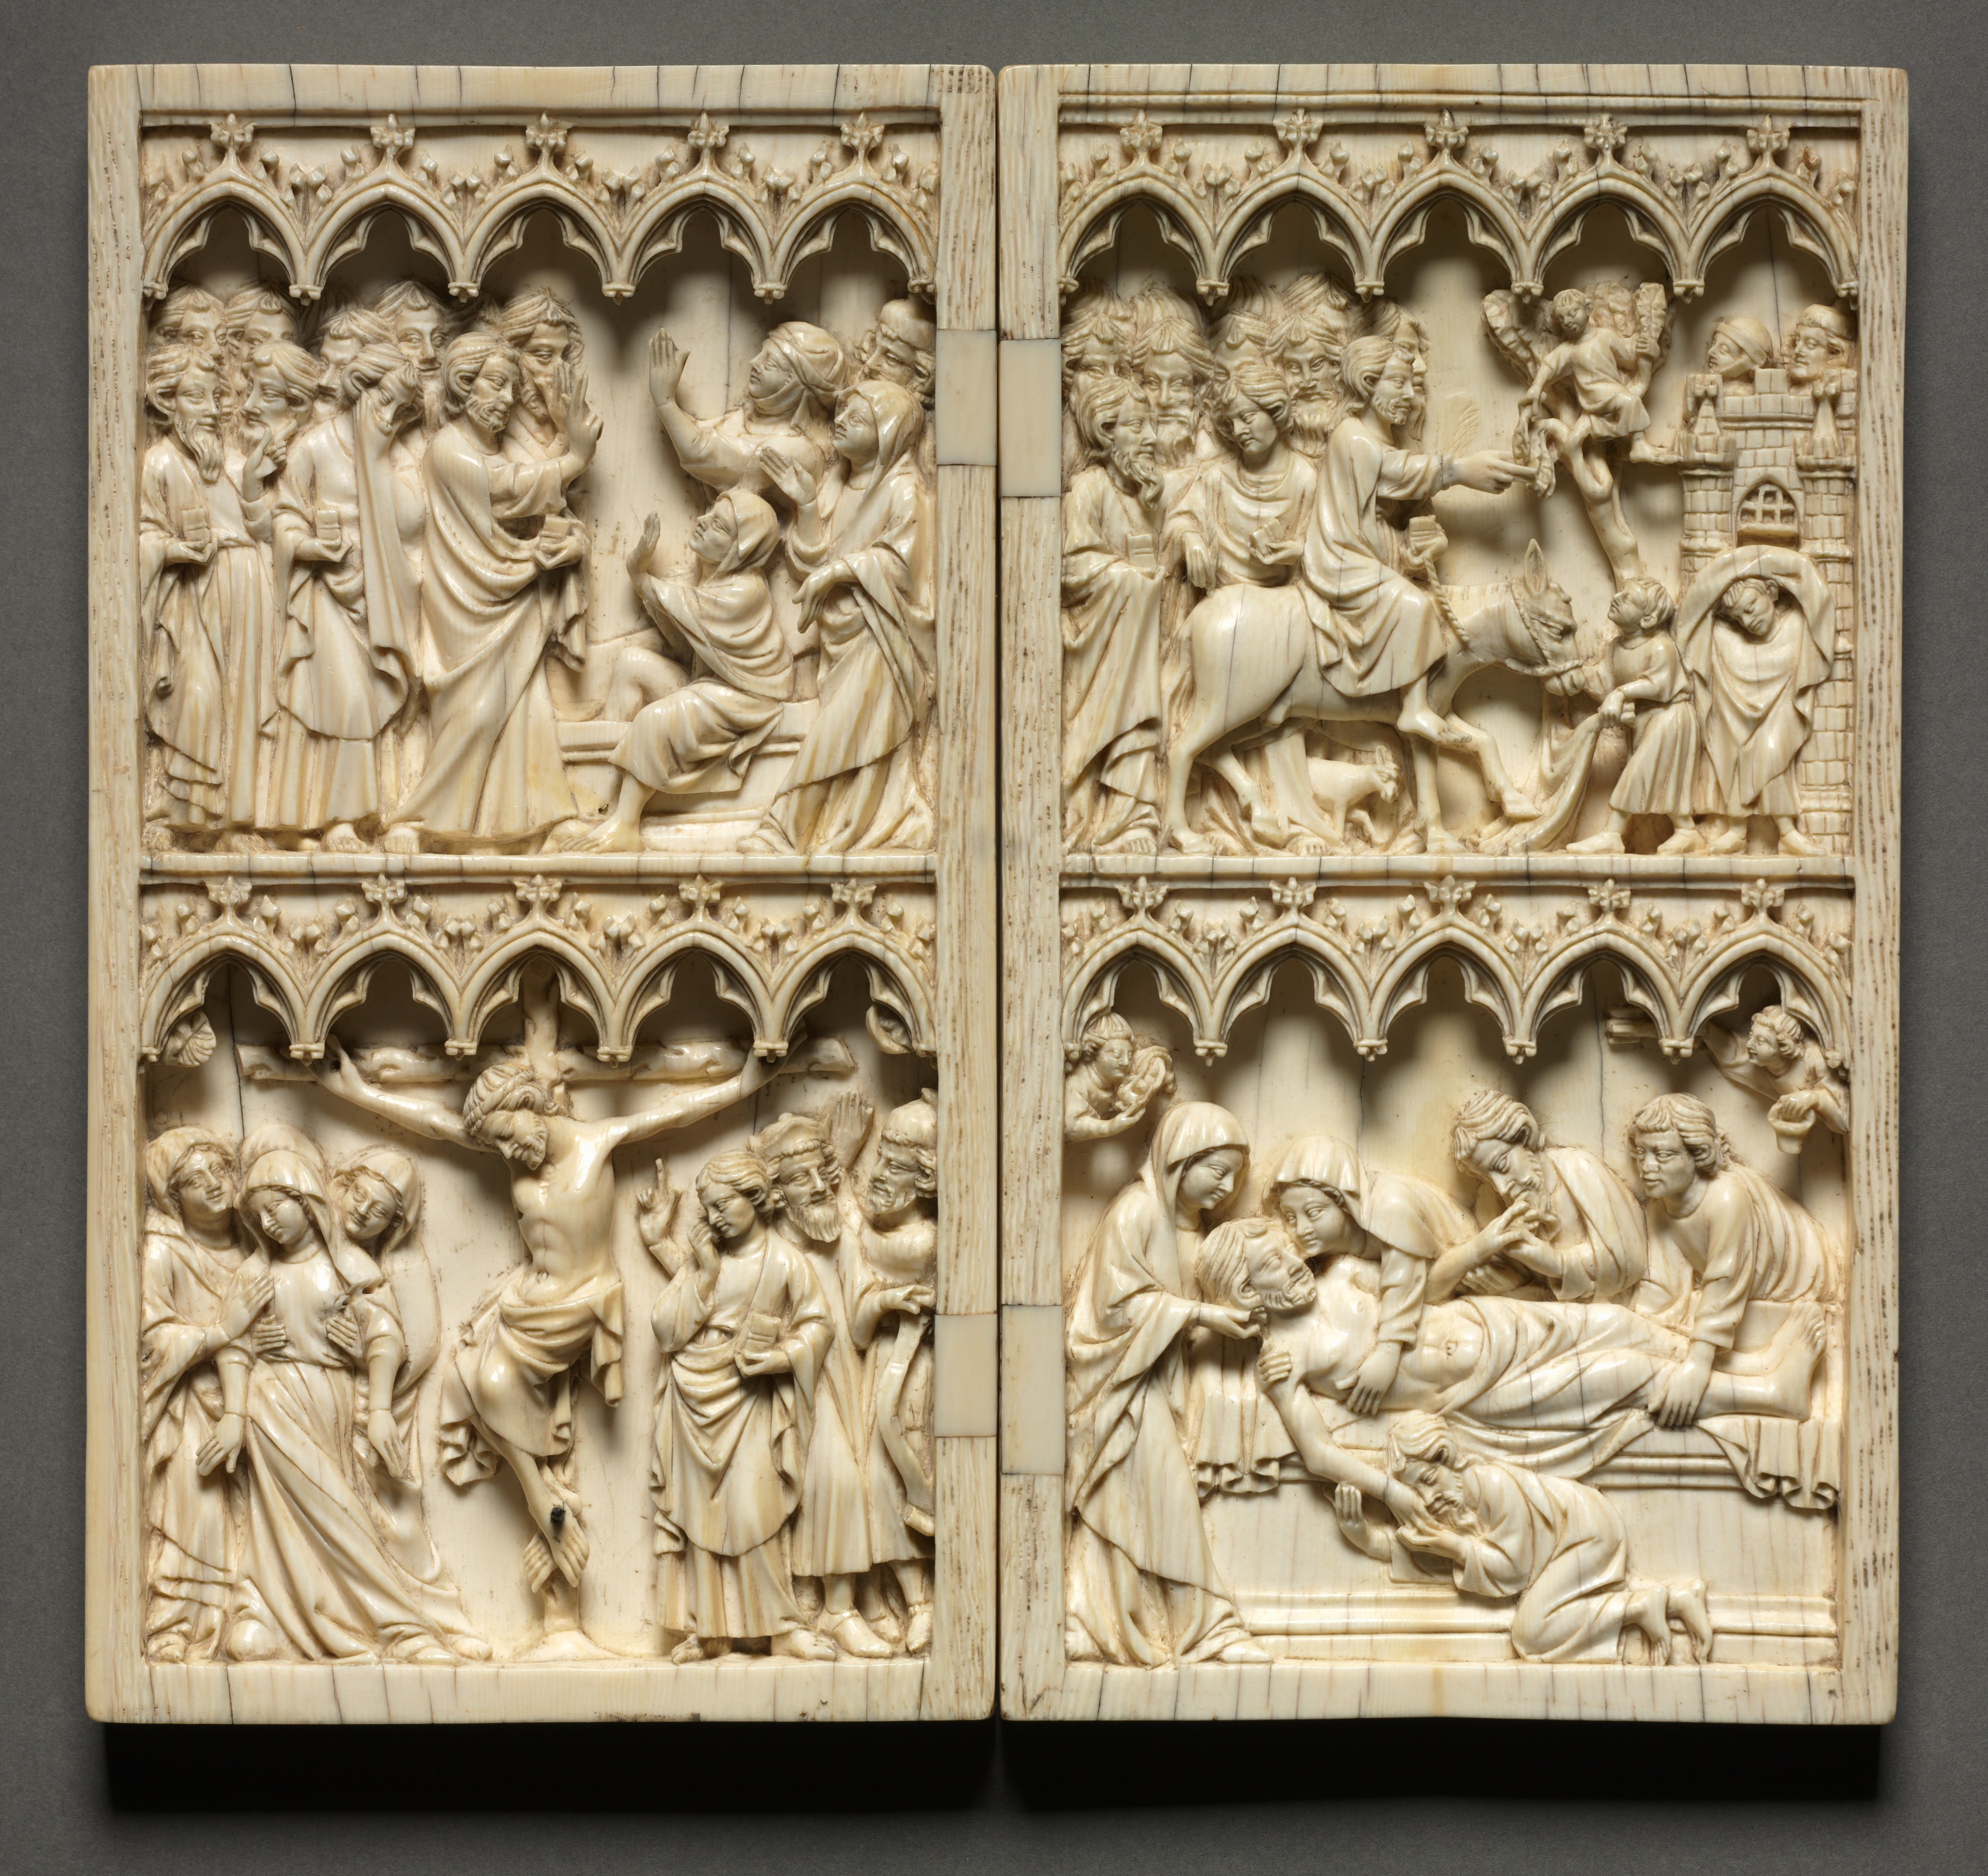 Diptych with Scenes from the Life of Christ (left wing: Raising of Lazarus and Crucifixion) (right wing: Entry into Jerusalem and Entombment)